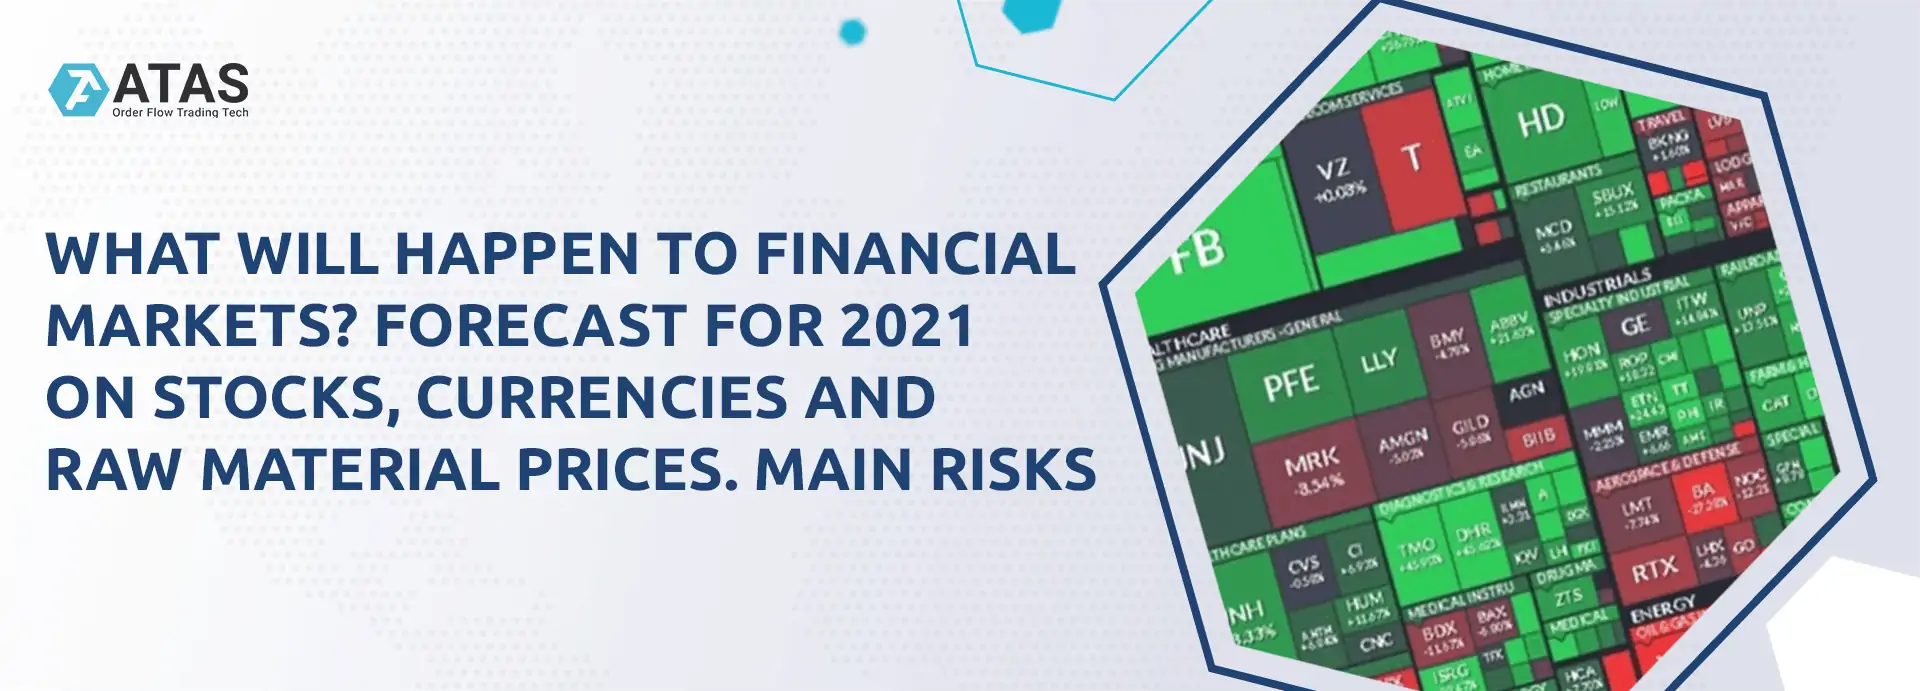 What will happen to financial markets Forecast for 2021 on stocks, currencies and raw material prices. Main risks